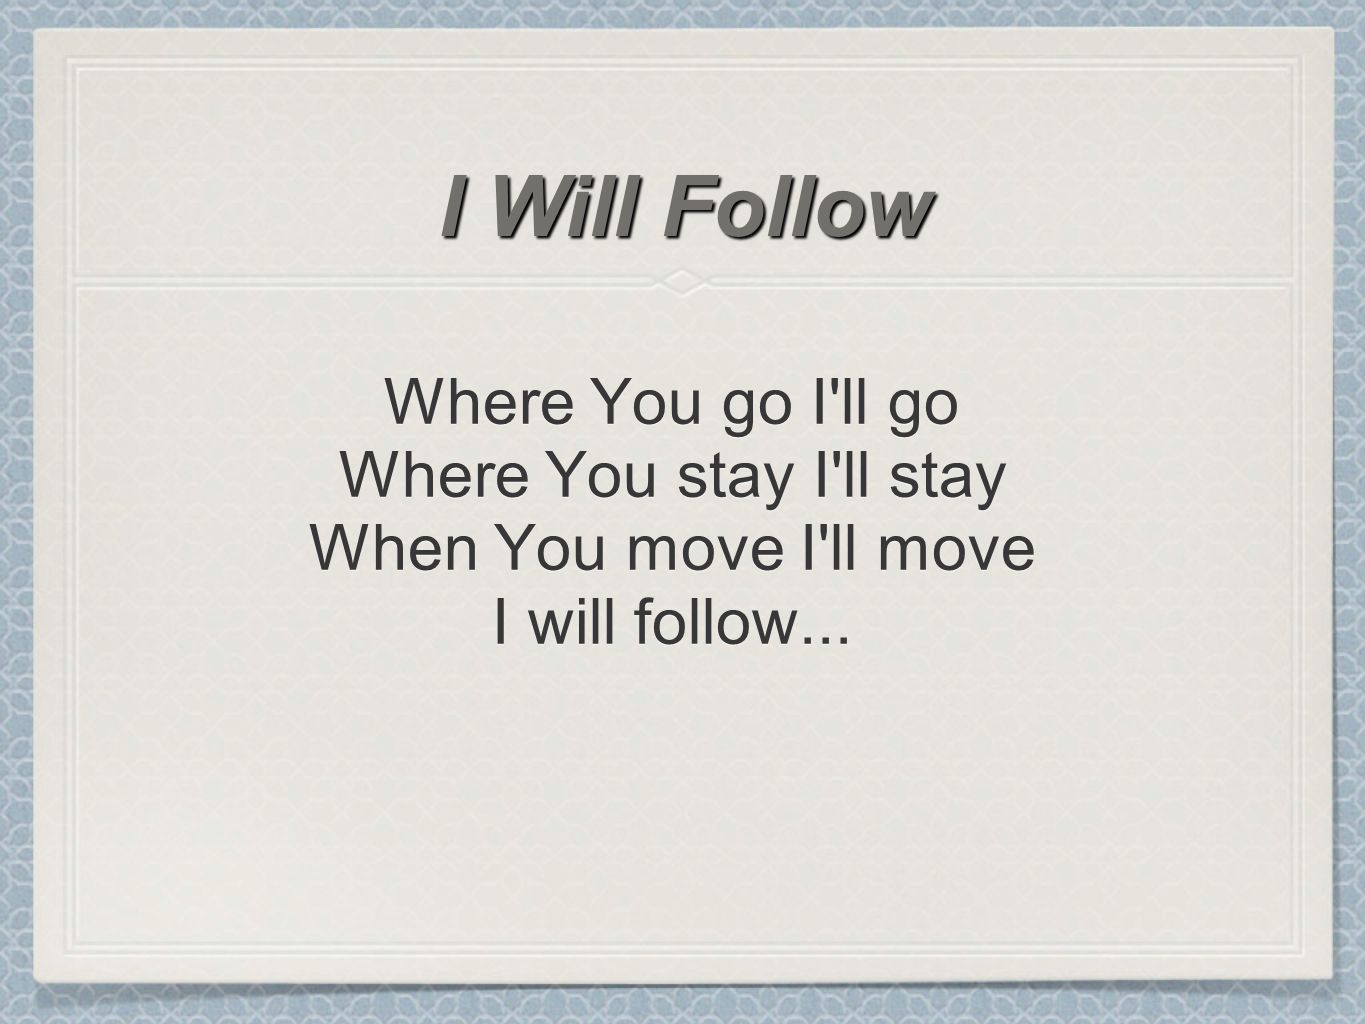 Where You go I ll go Where You stay I ll stay When You move I ll move I will follow...